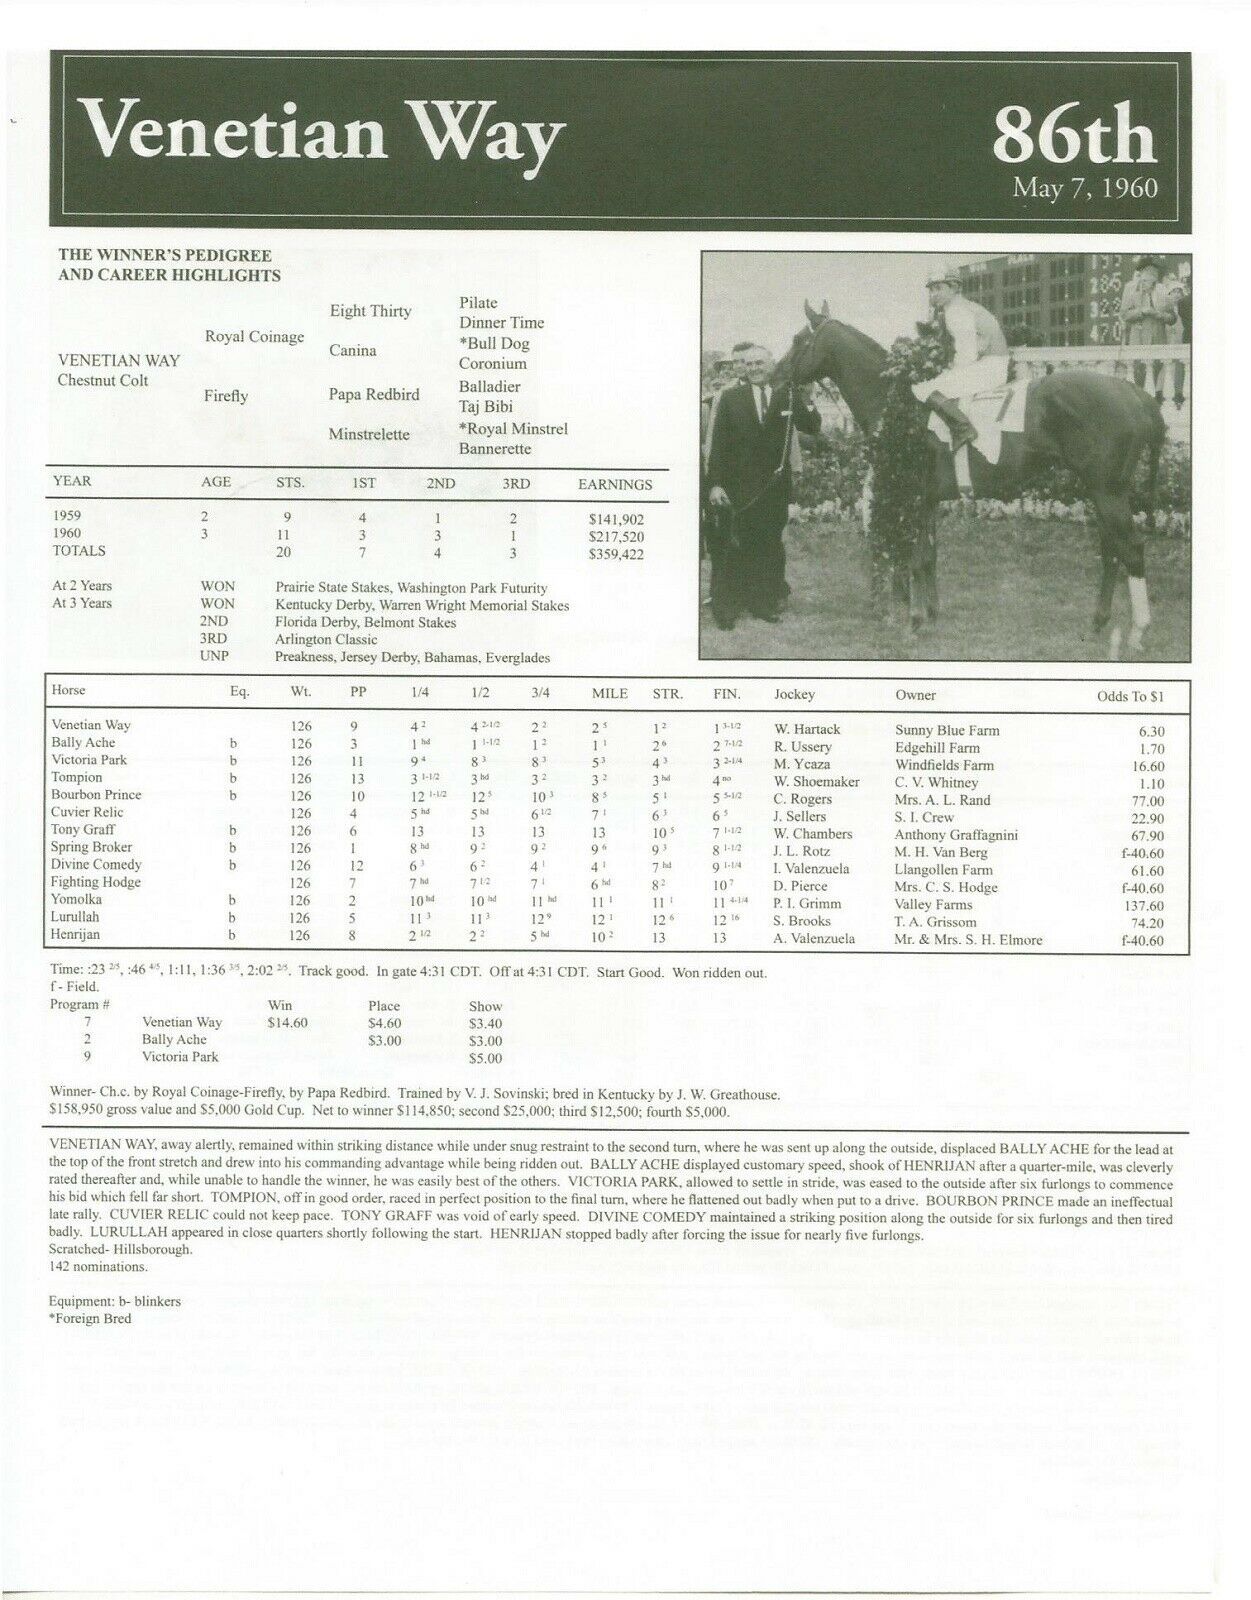 Primary image for 1960 - VENETIAN WAY - Kentucky Derby Race Chart, Pedigree & Career Highlights